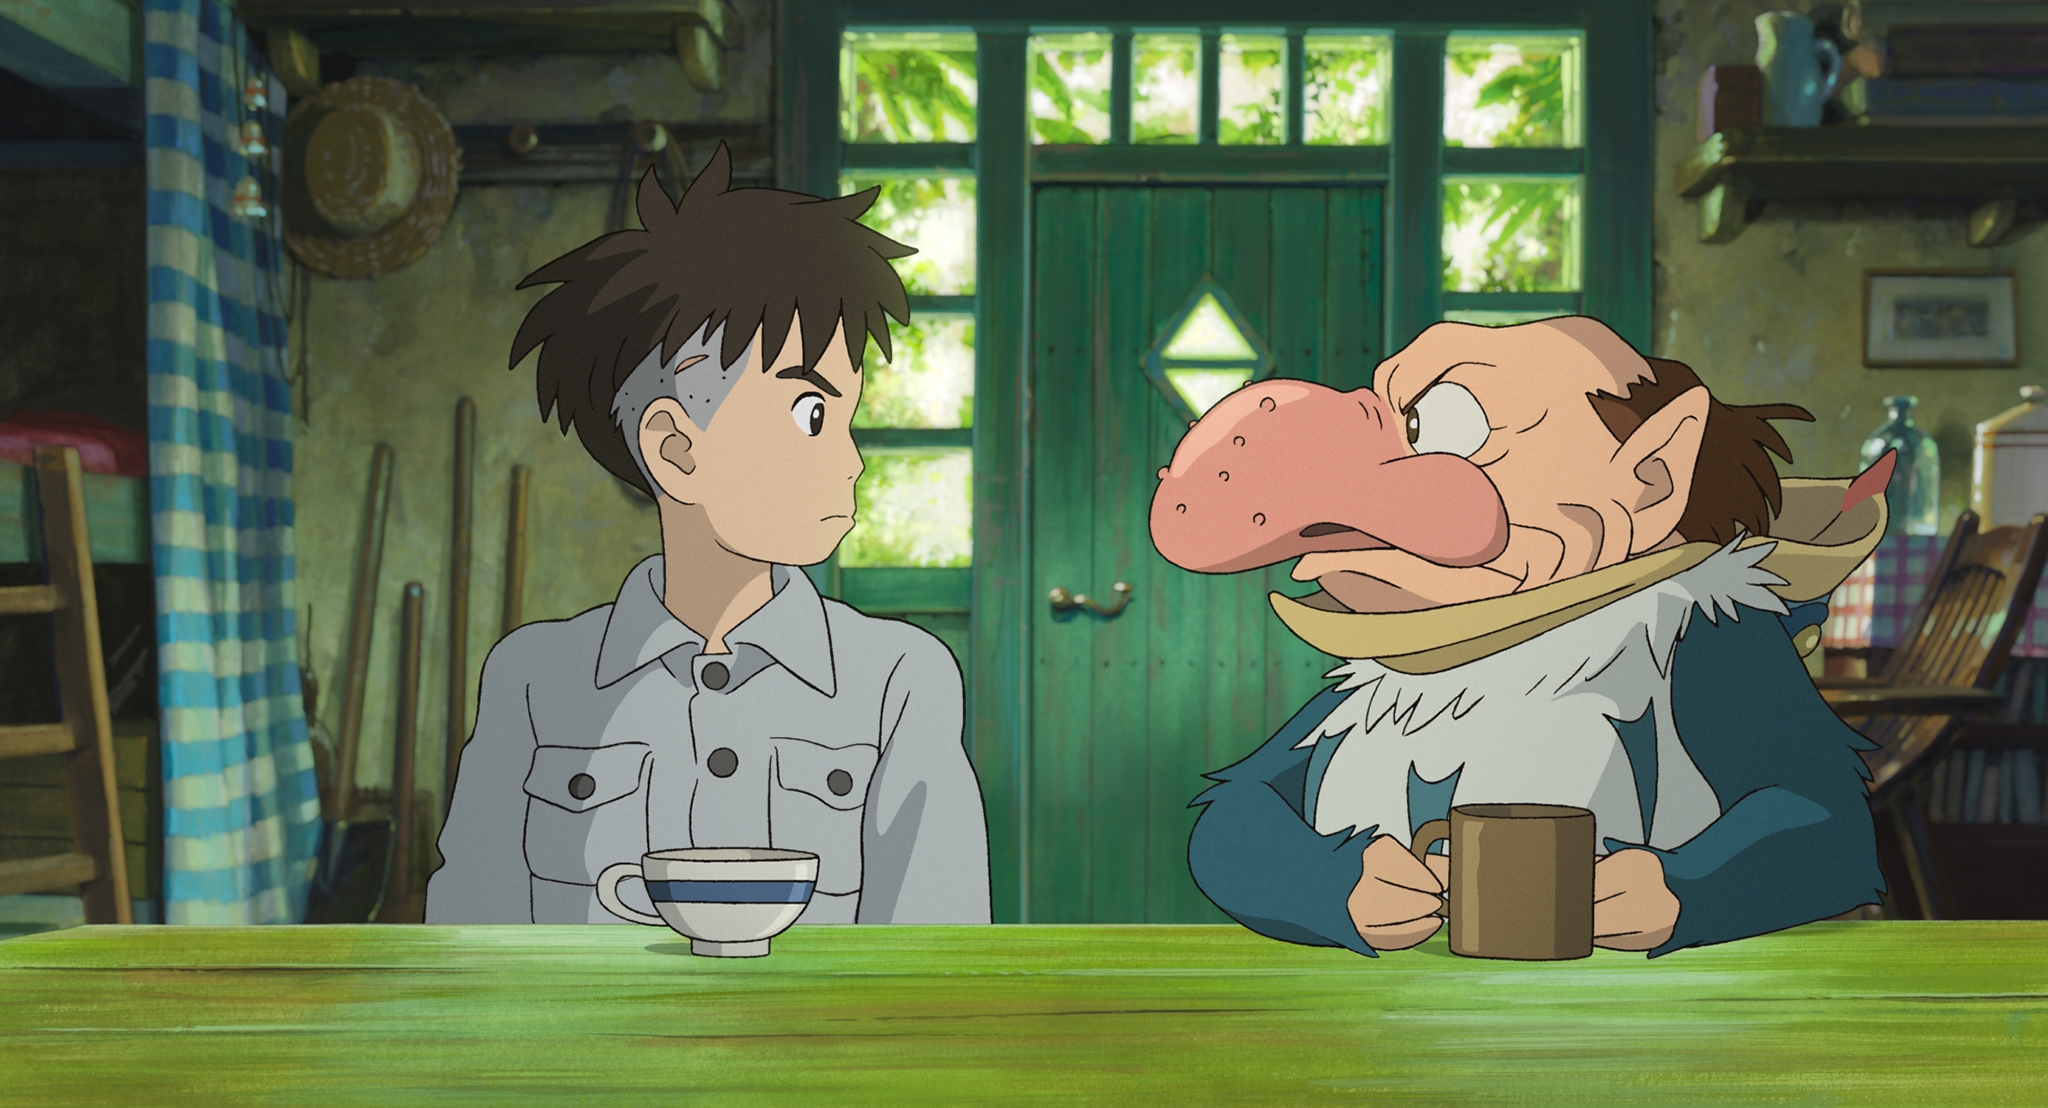 Animation of a boy and a figure that looks like a mixture of heron and human. They are sitting at a counter drinking tea.